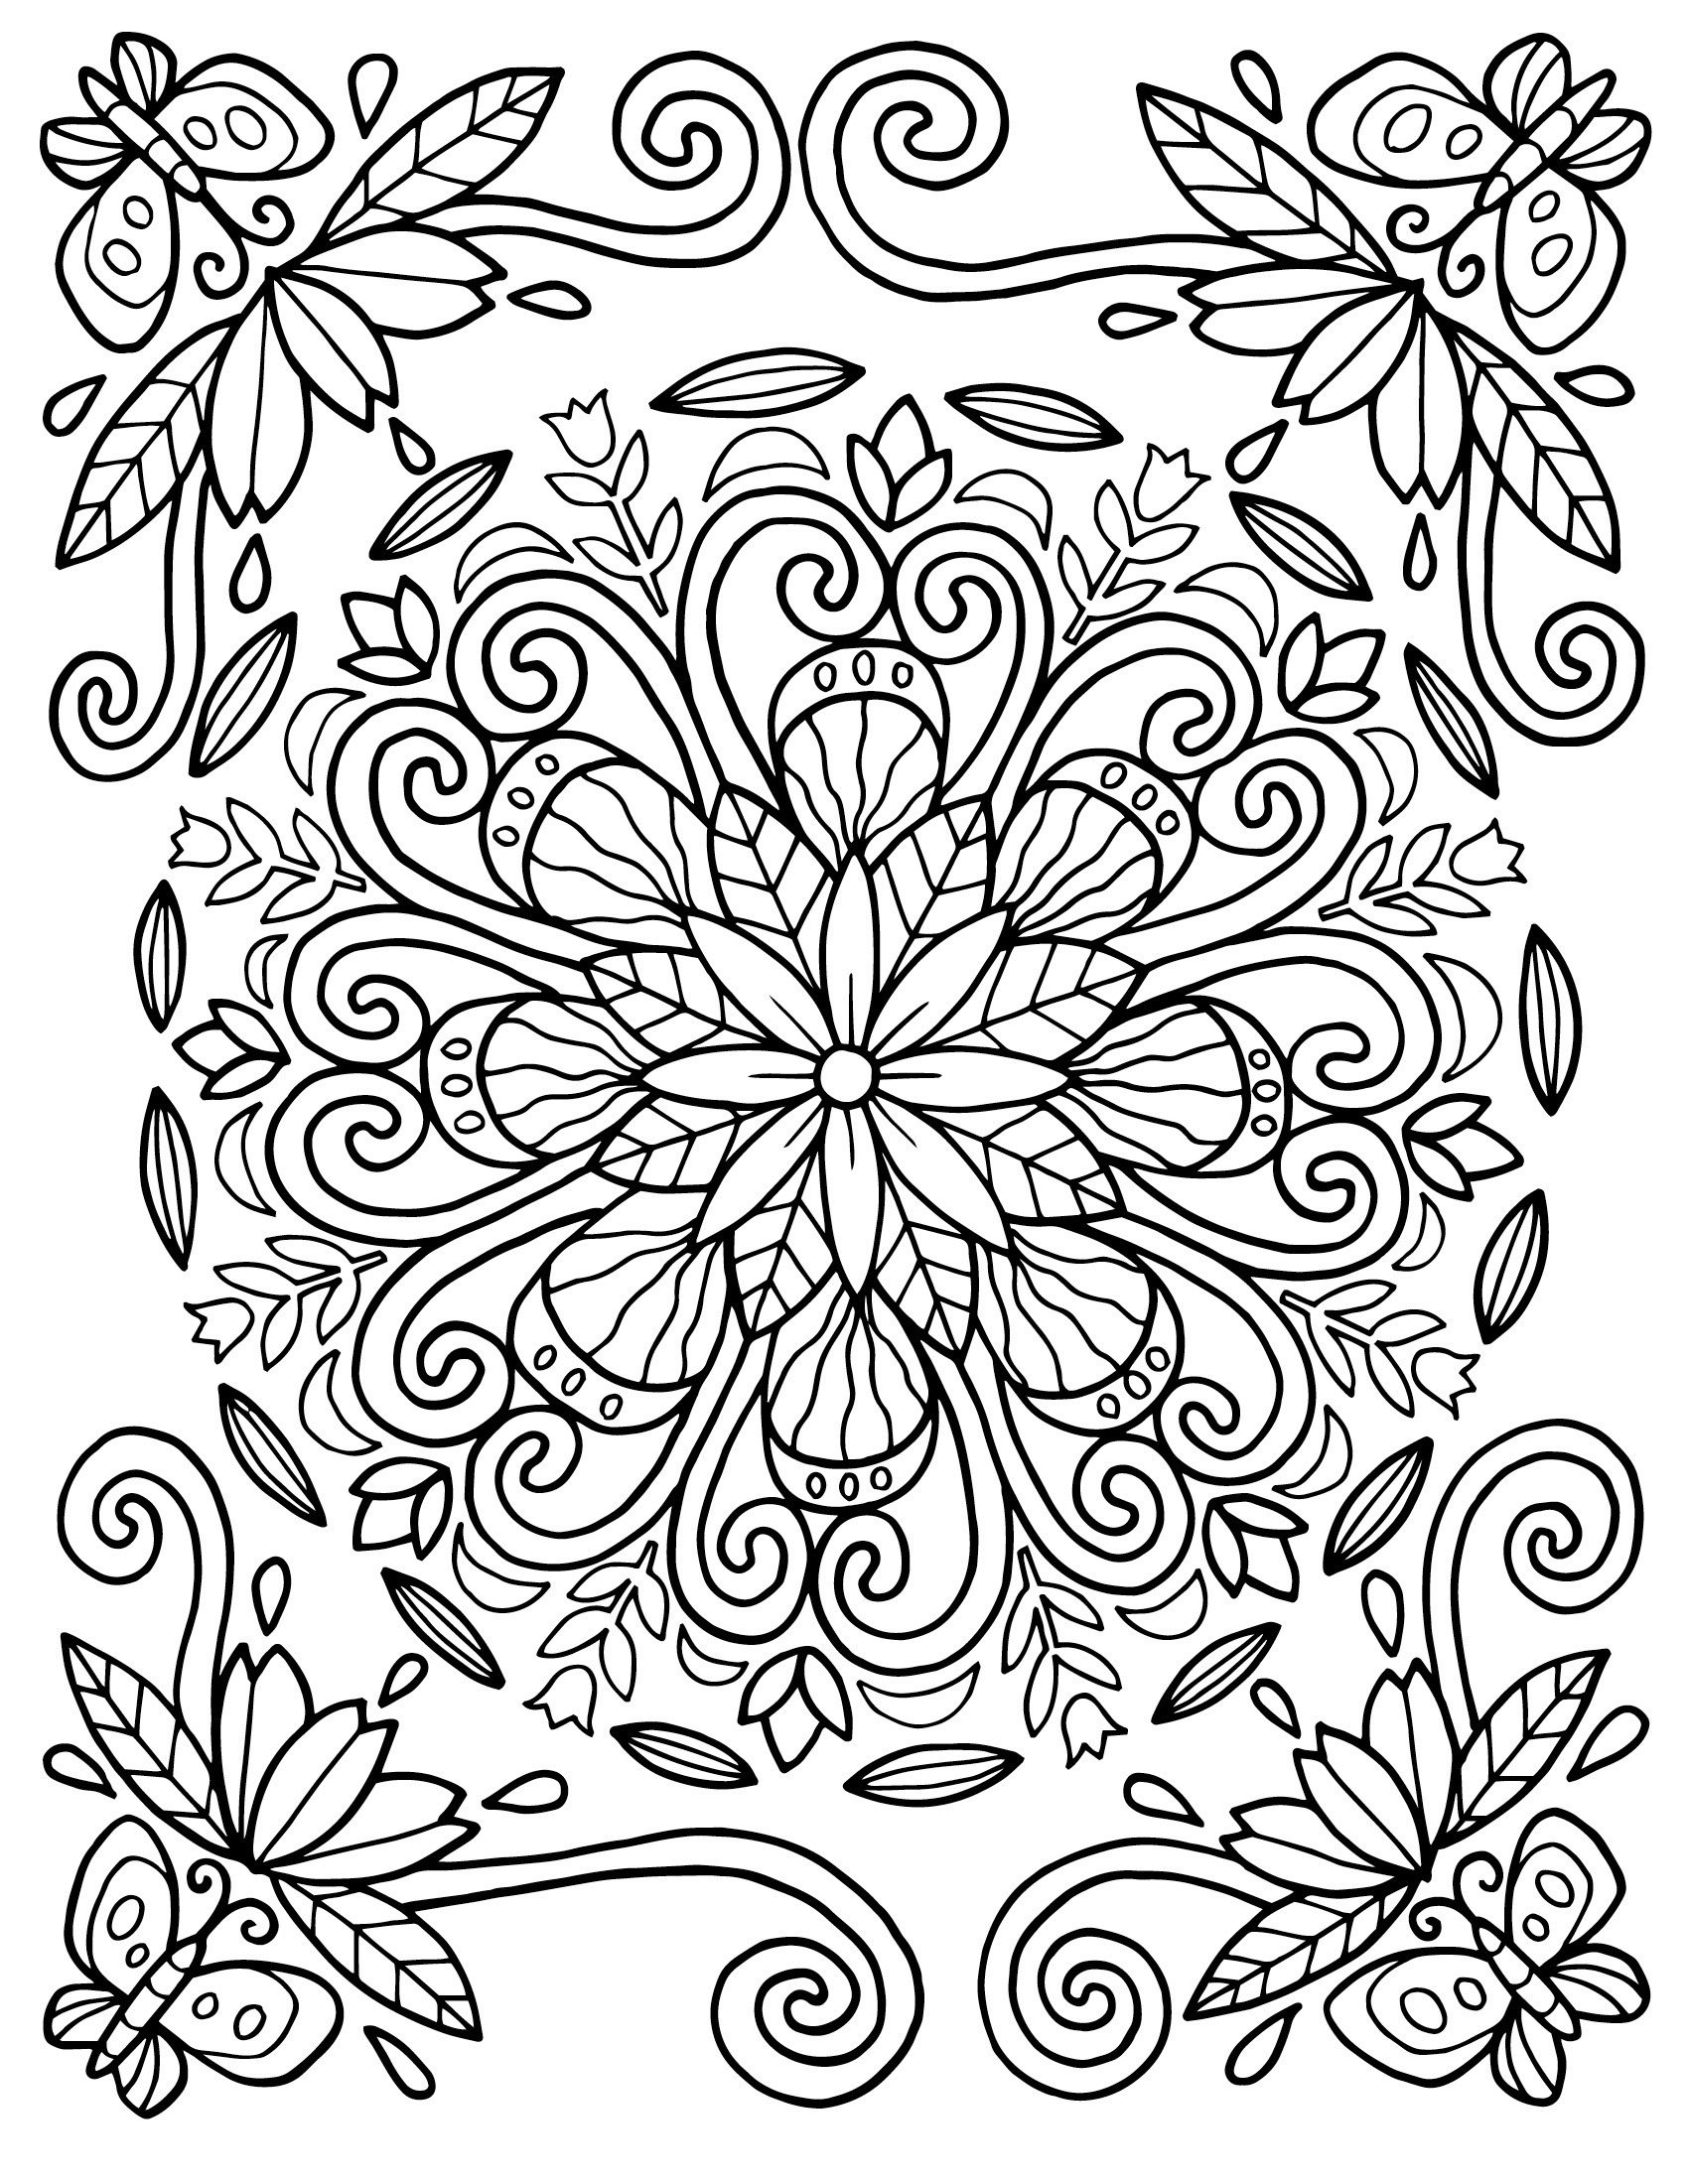 Flower Designs Coloring Pages Coloring Home